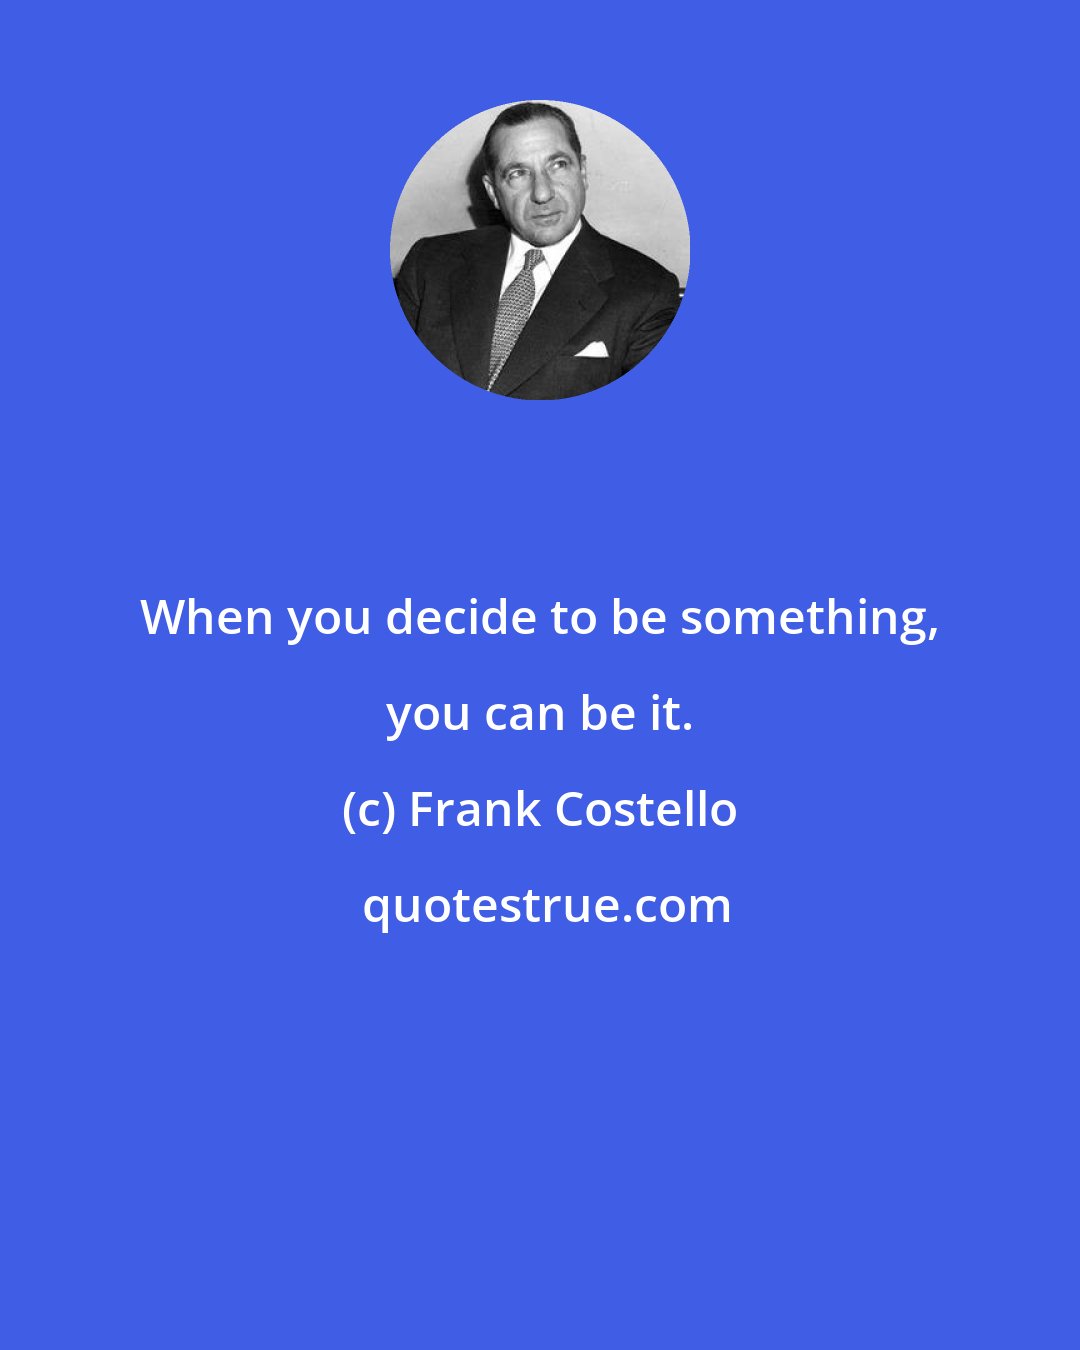 Frank Costello: When you decide to be something, you can be it.